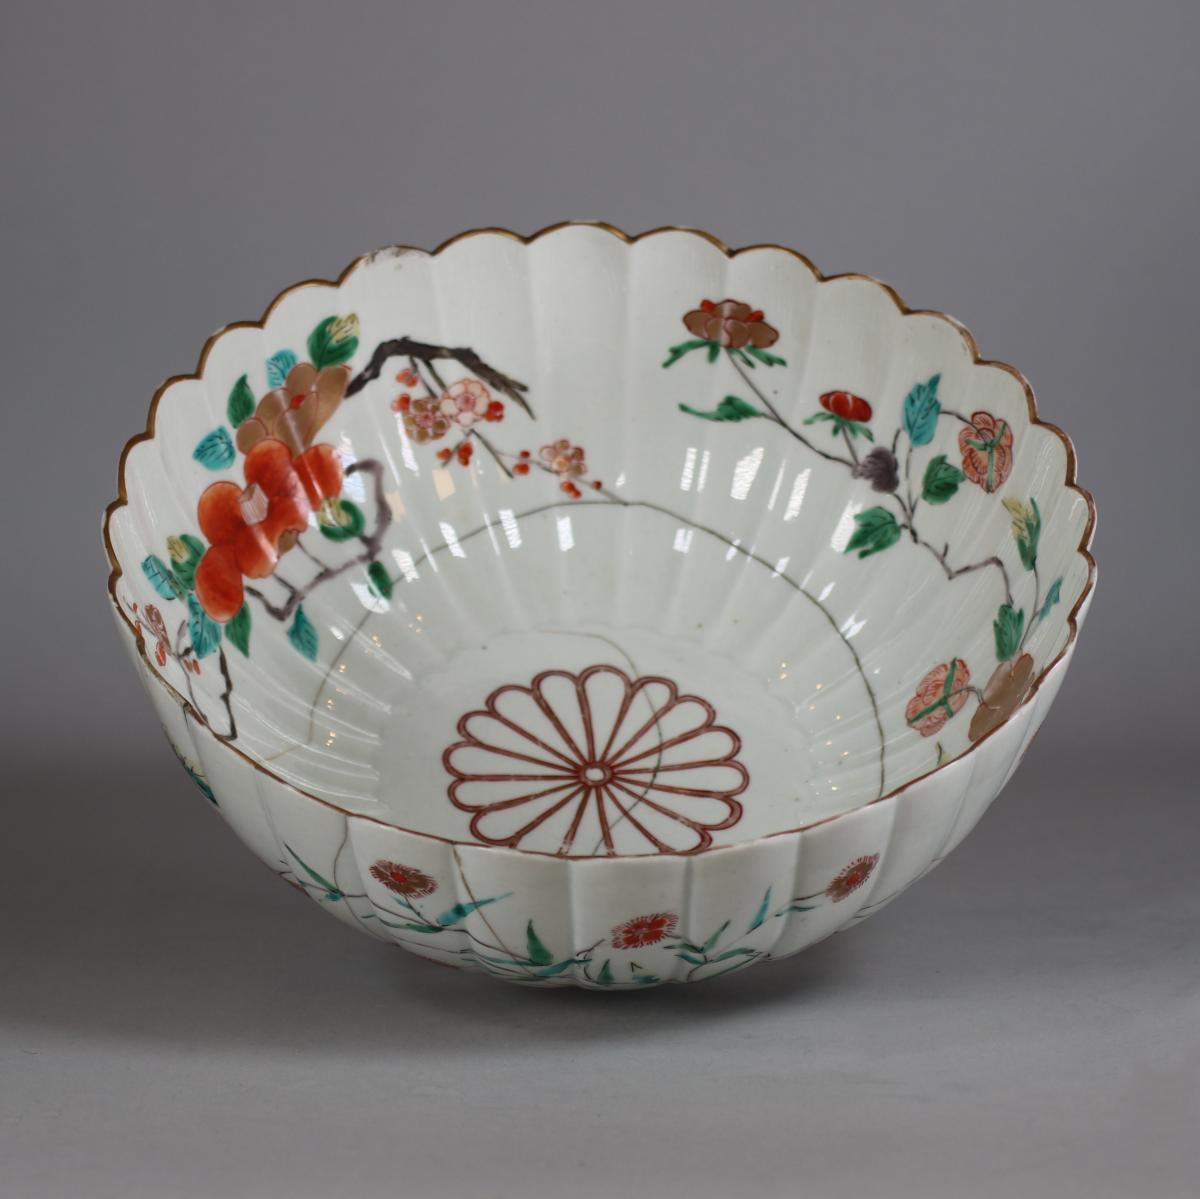 Interior and well of Japanese Kakiemon bowl